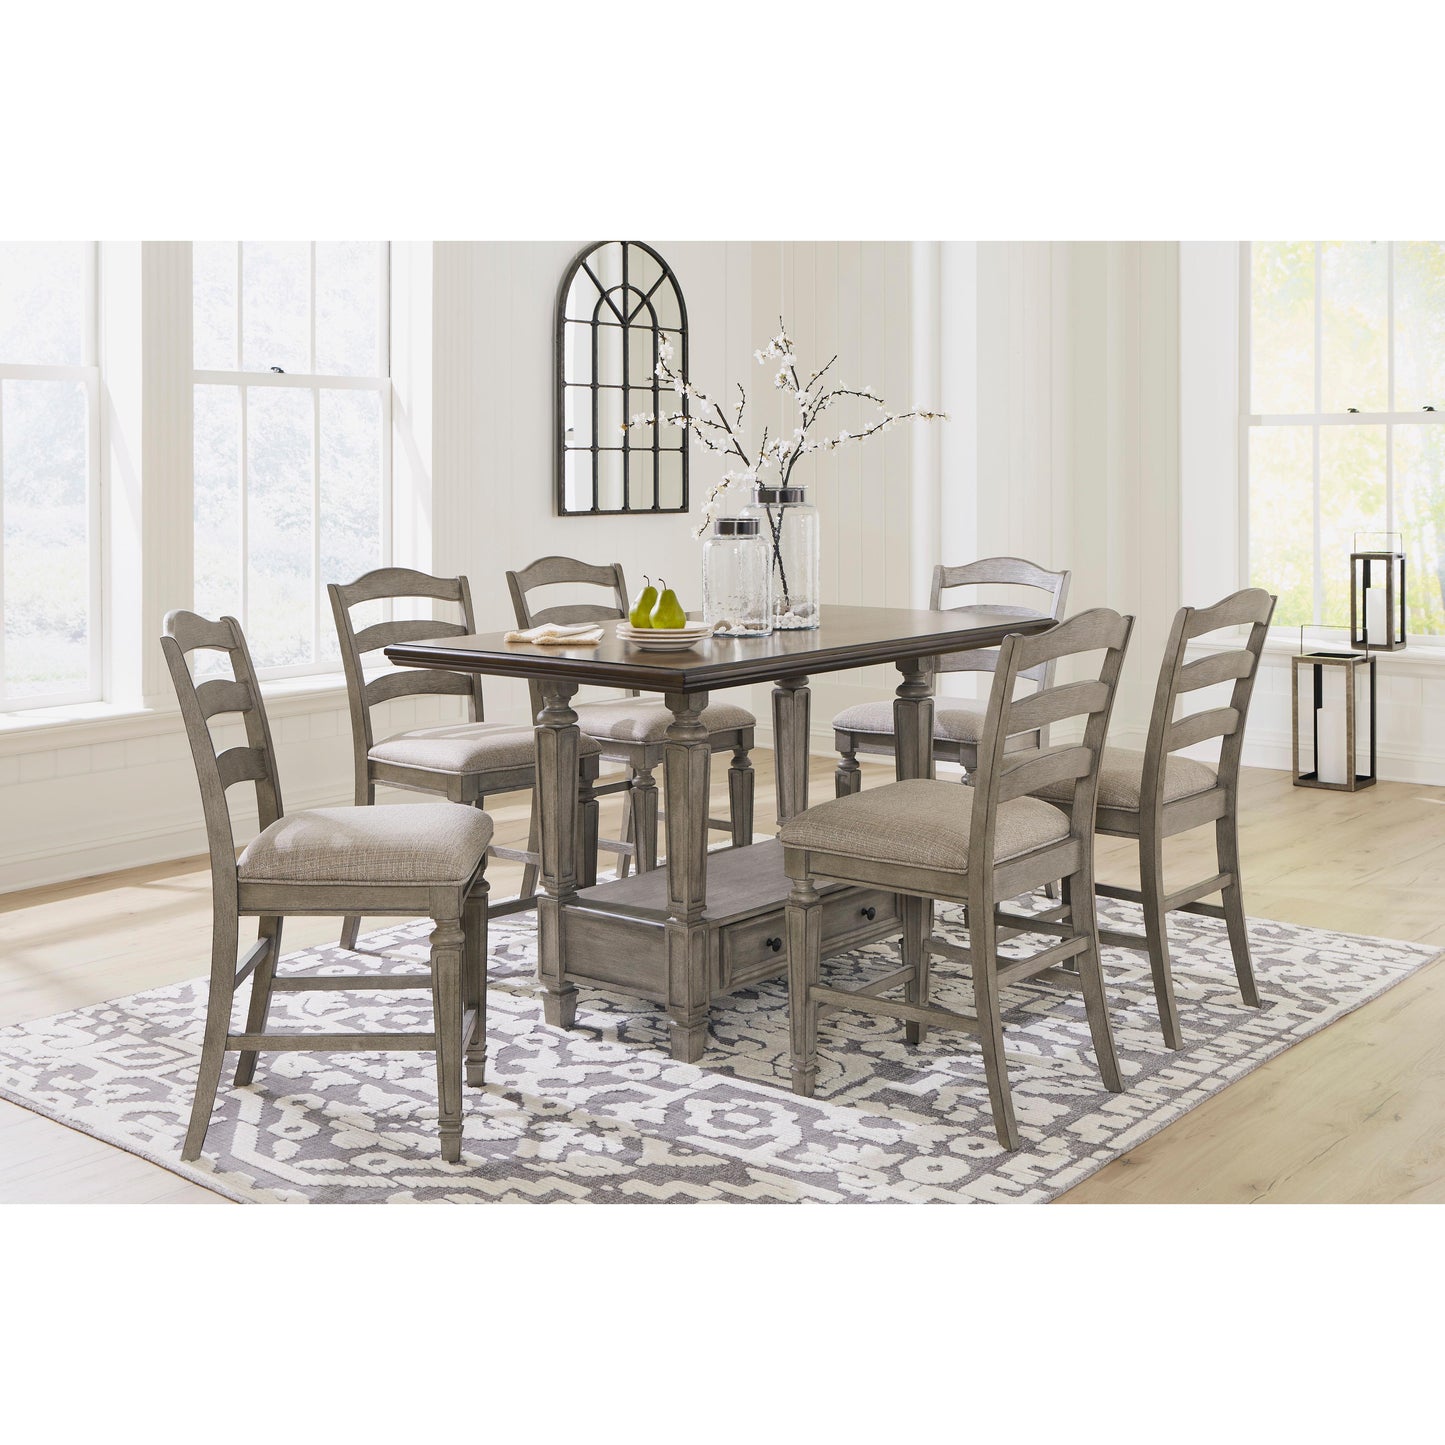 Signature Design by Ashley Lodenbay D751 7 pc Counter Height Dining Set IMAGE 1